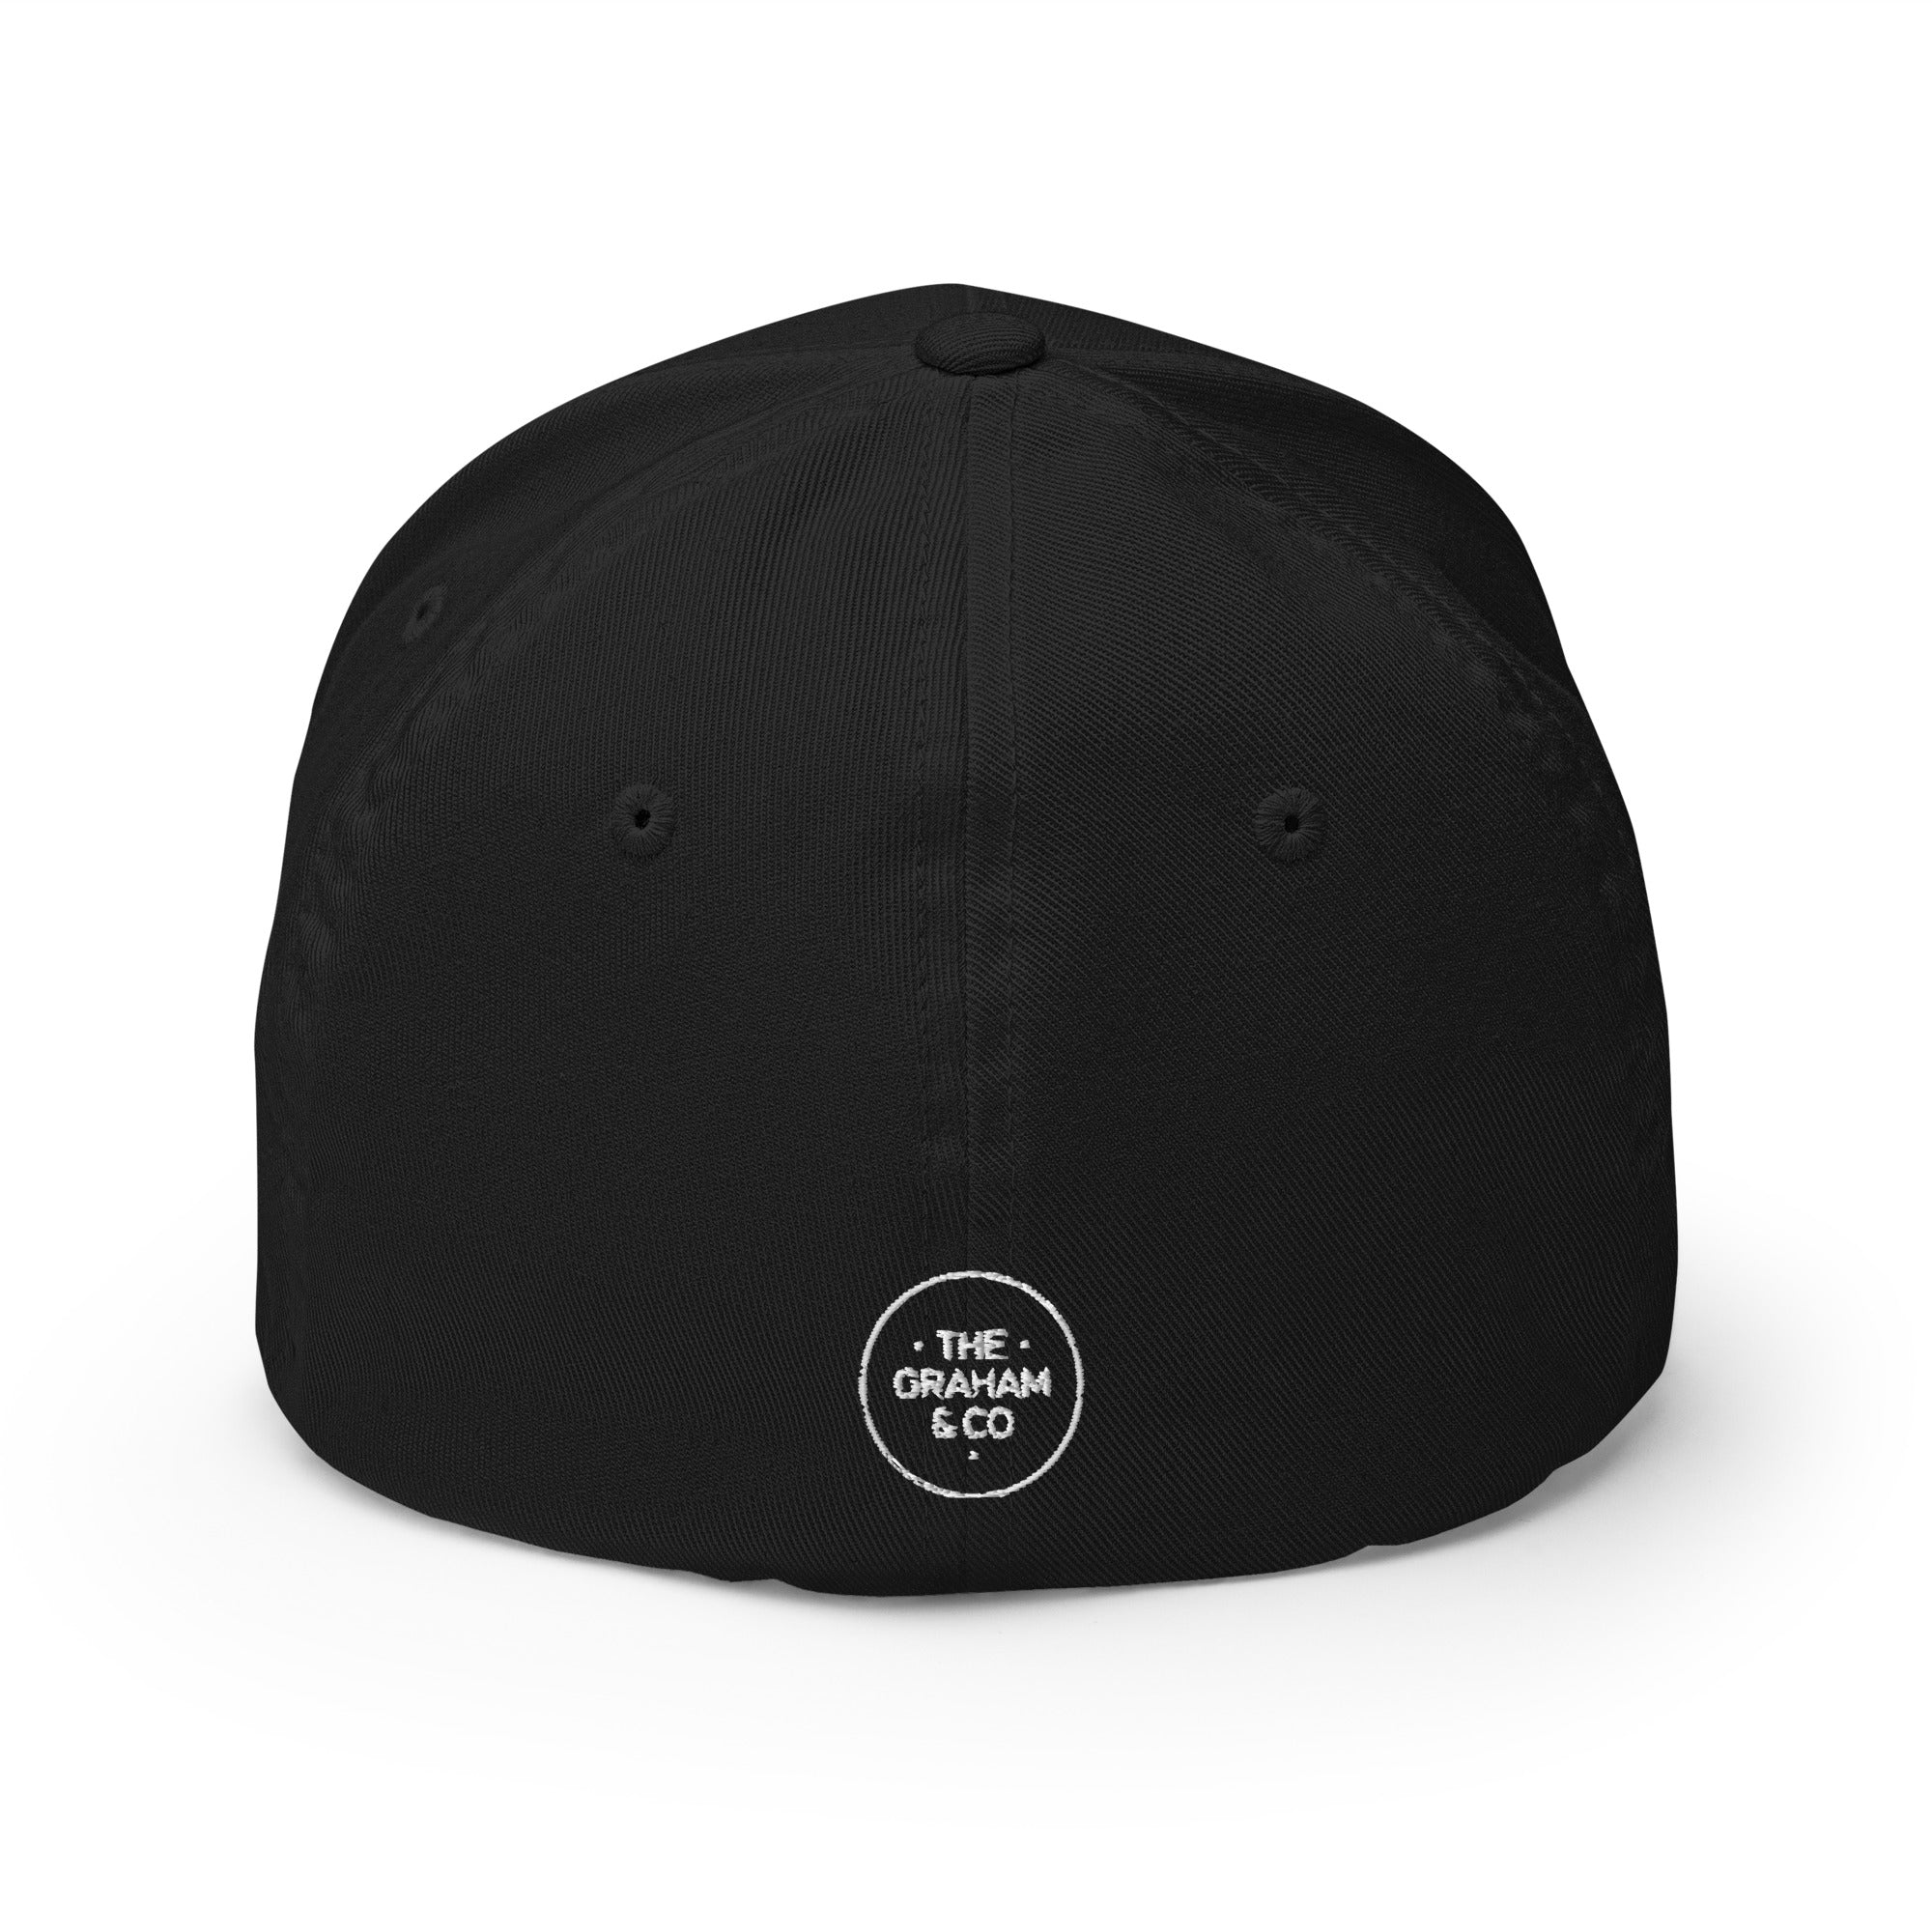 The GRAHAM & CO BEAR CLW HALO - FLEX FIT HAT